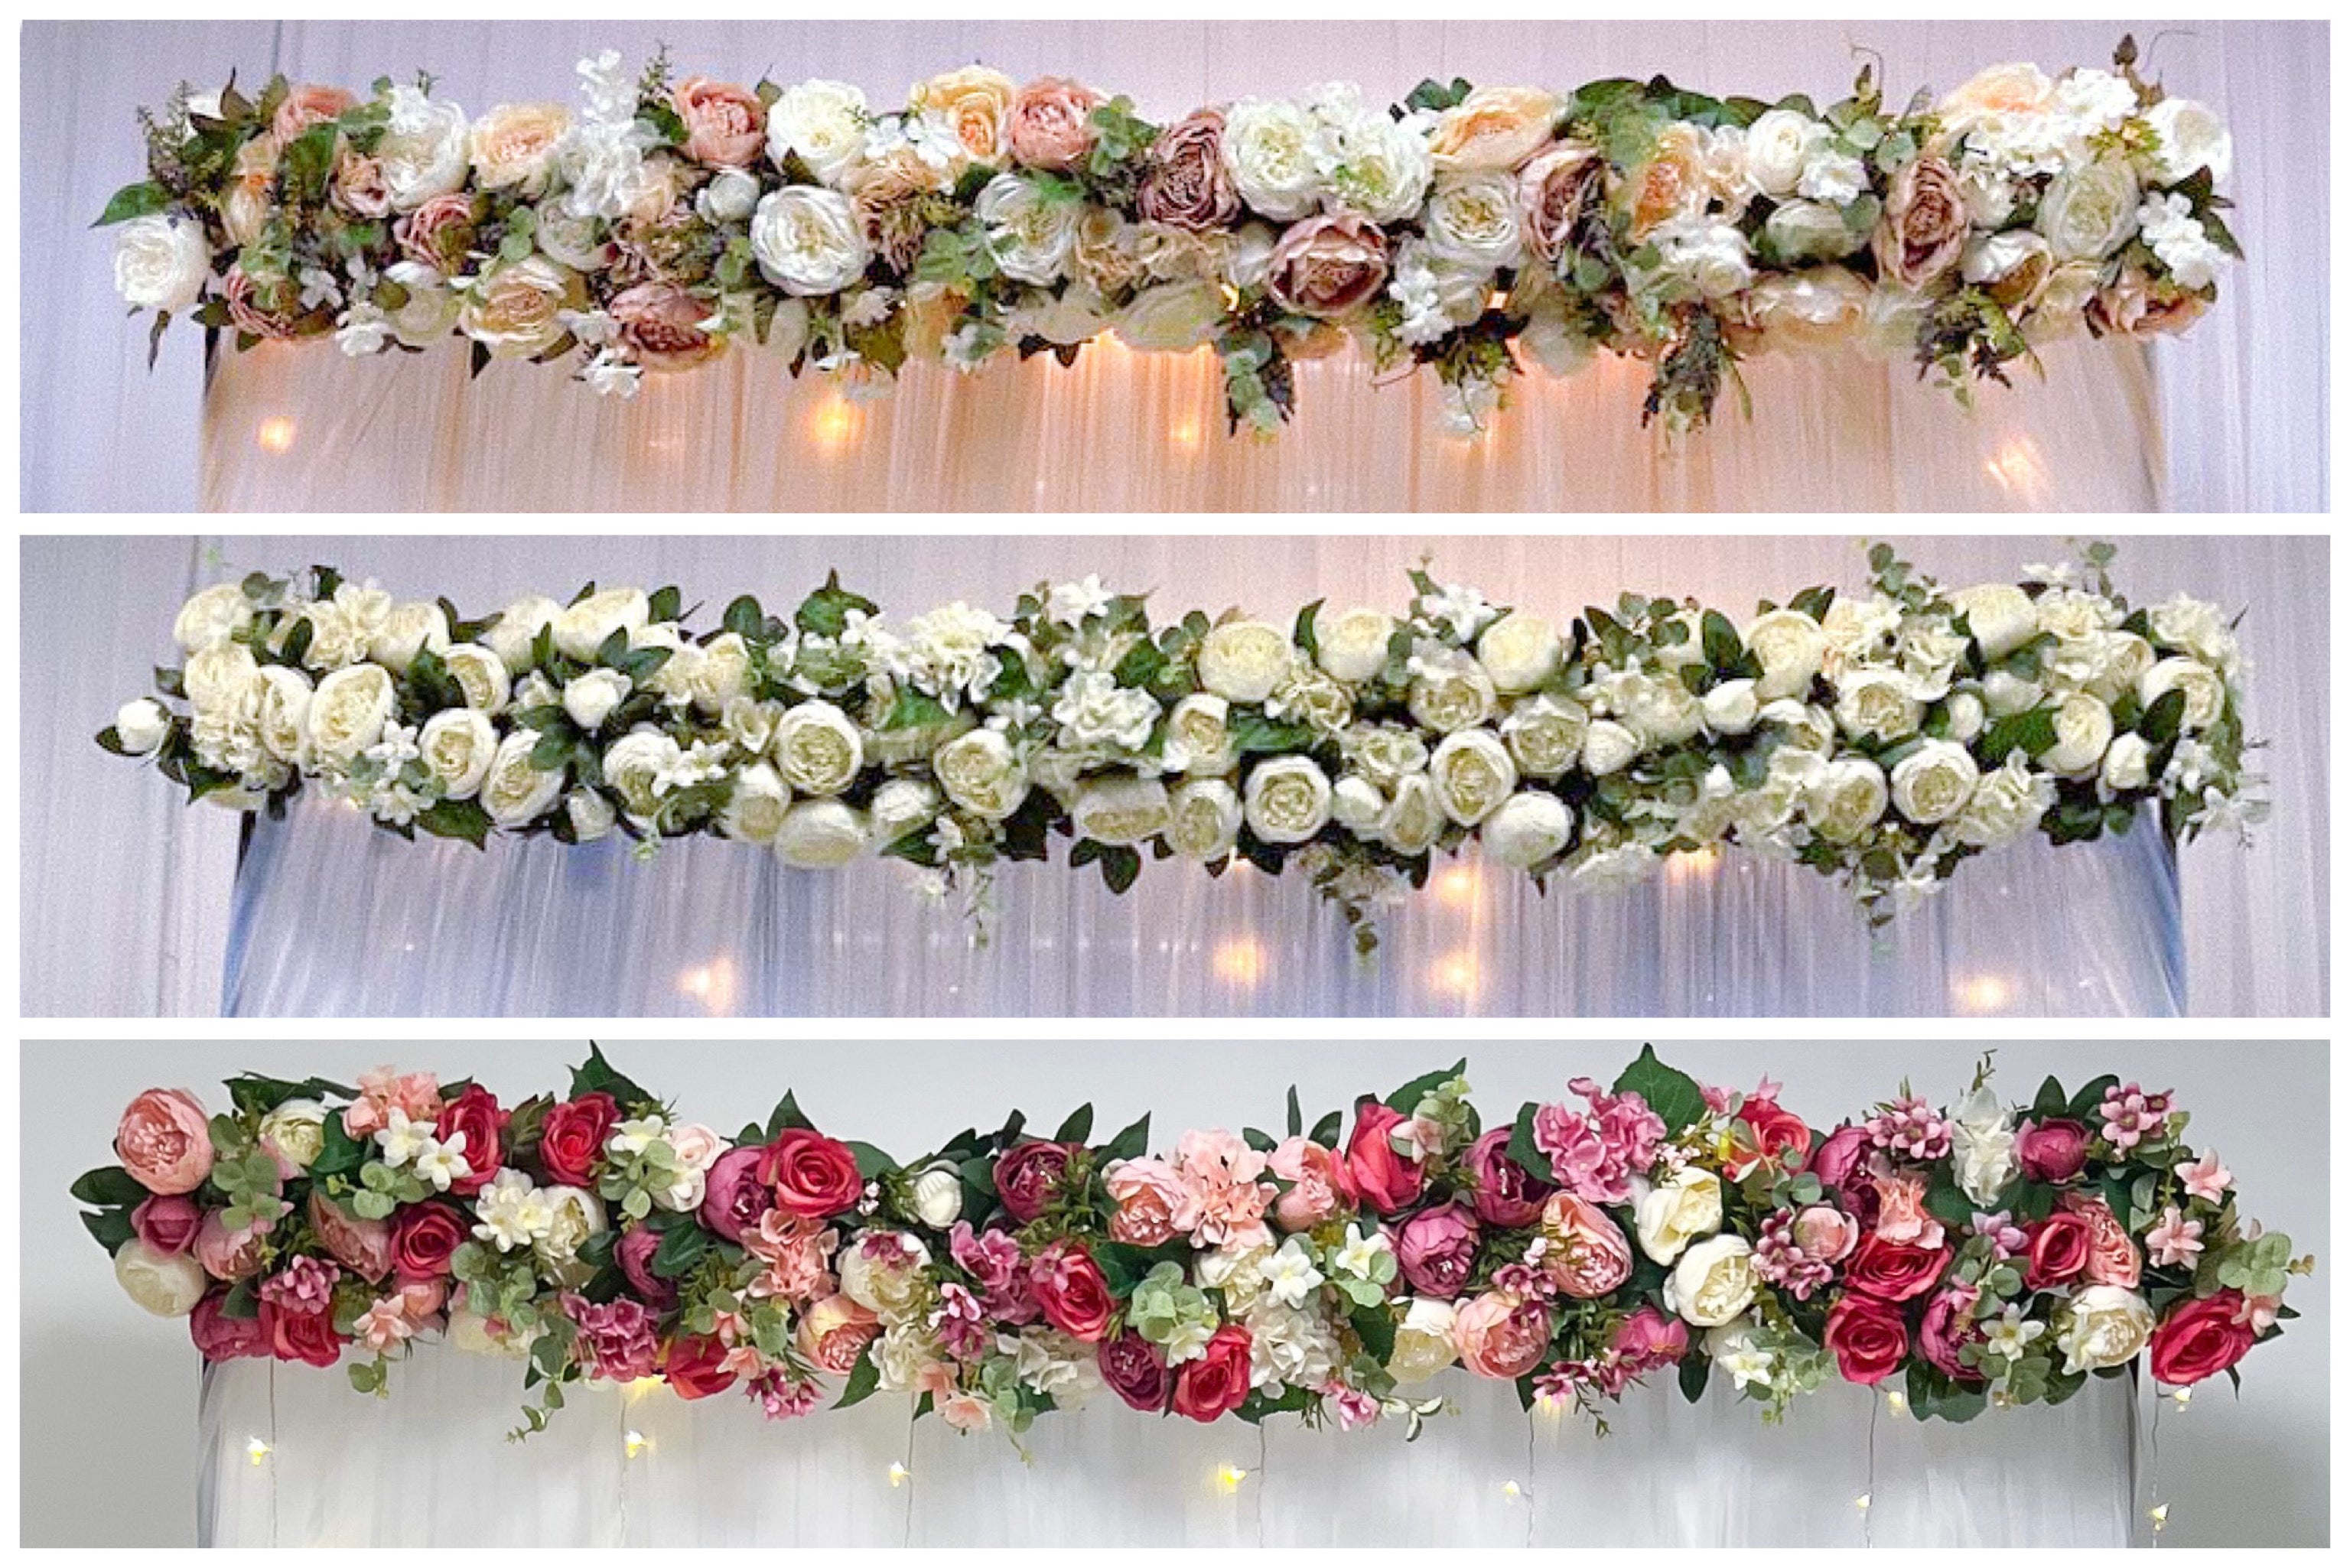 Basic Floral Arch with Fairy-light Backdrop